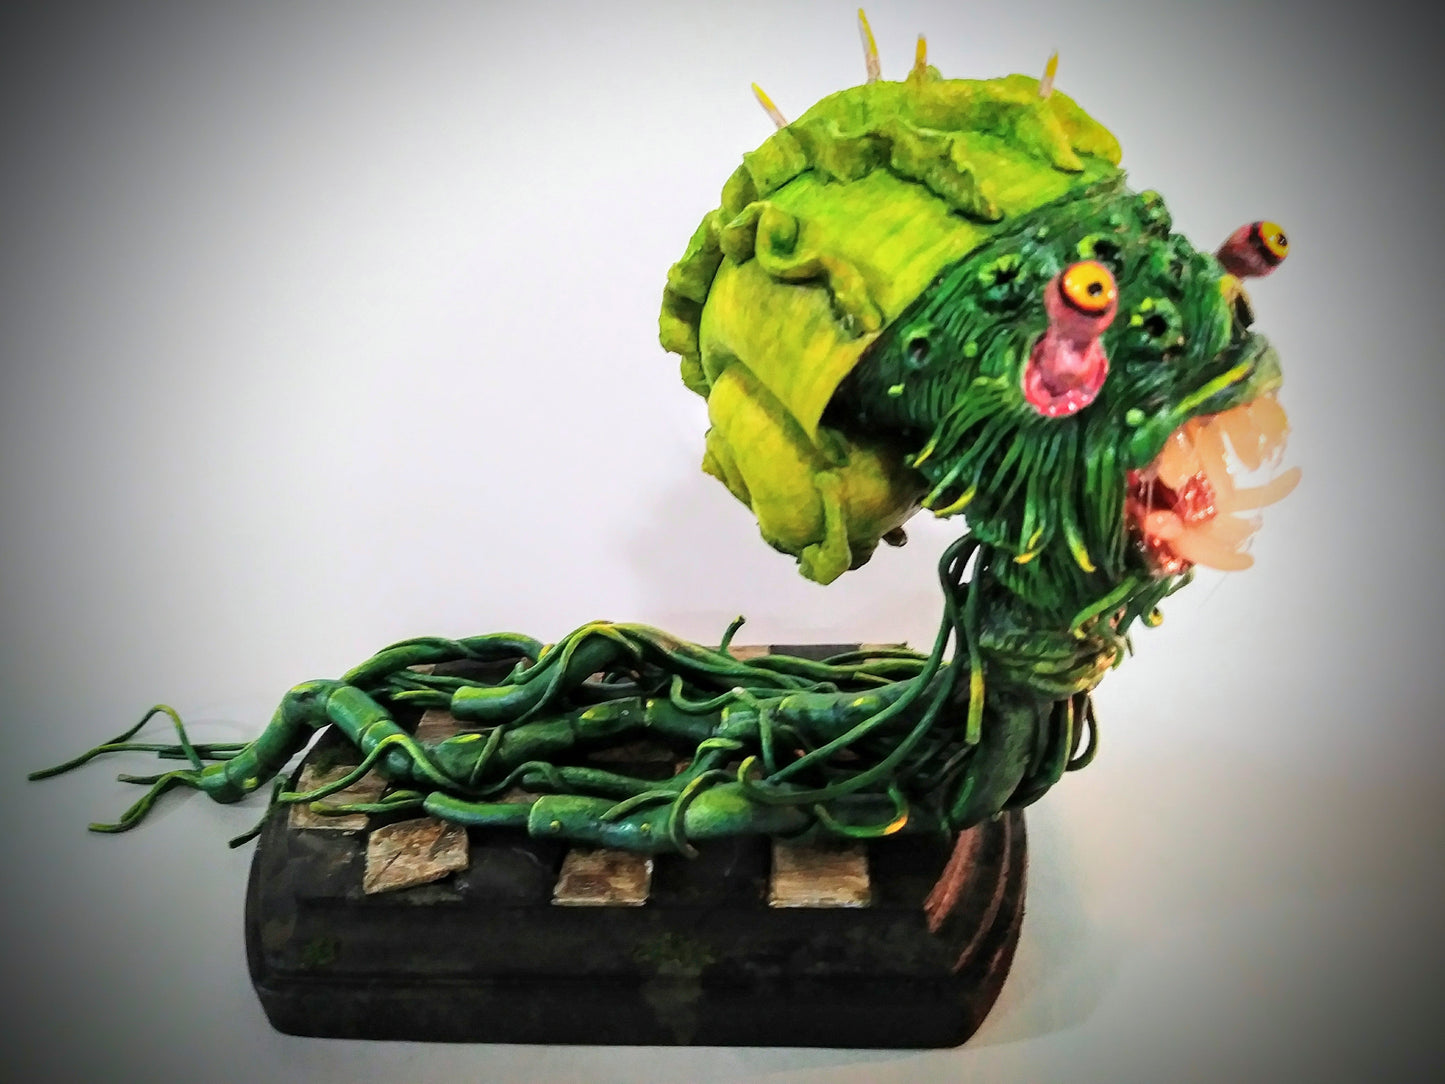 Thurs. October 5, 2023 Fantasy Clay Diorama Workshop 7 - 9 PM (ages 14 - up)